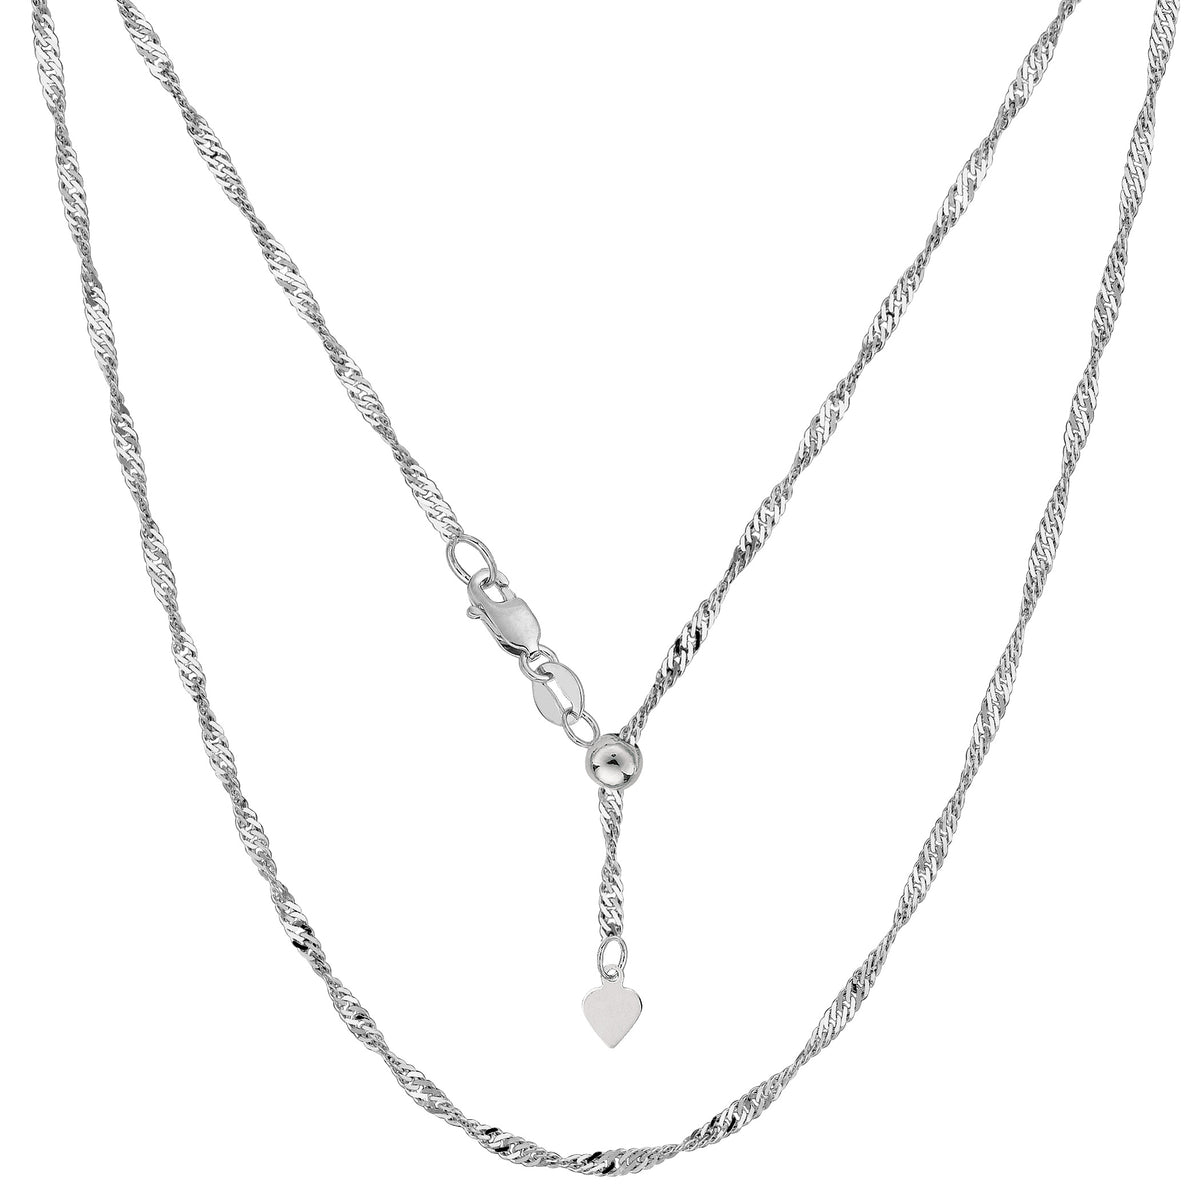 Sterling Silver Rhodium Plated 22" Sliding Adjustable Singapore Chain Necklace, 1.5mm fine designer jewelry for men and women